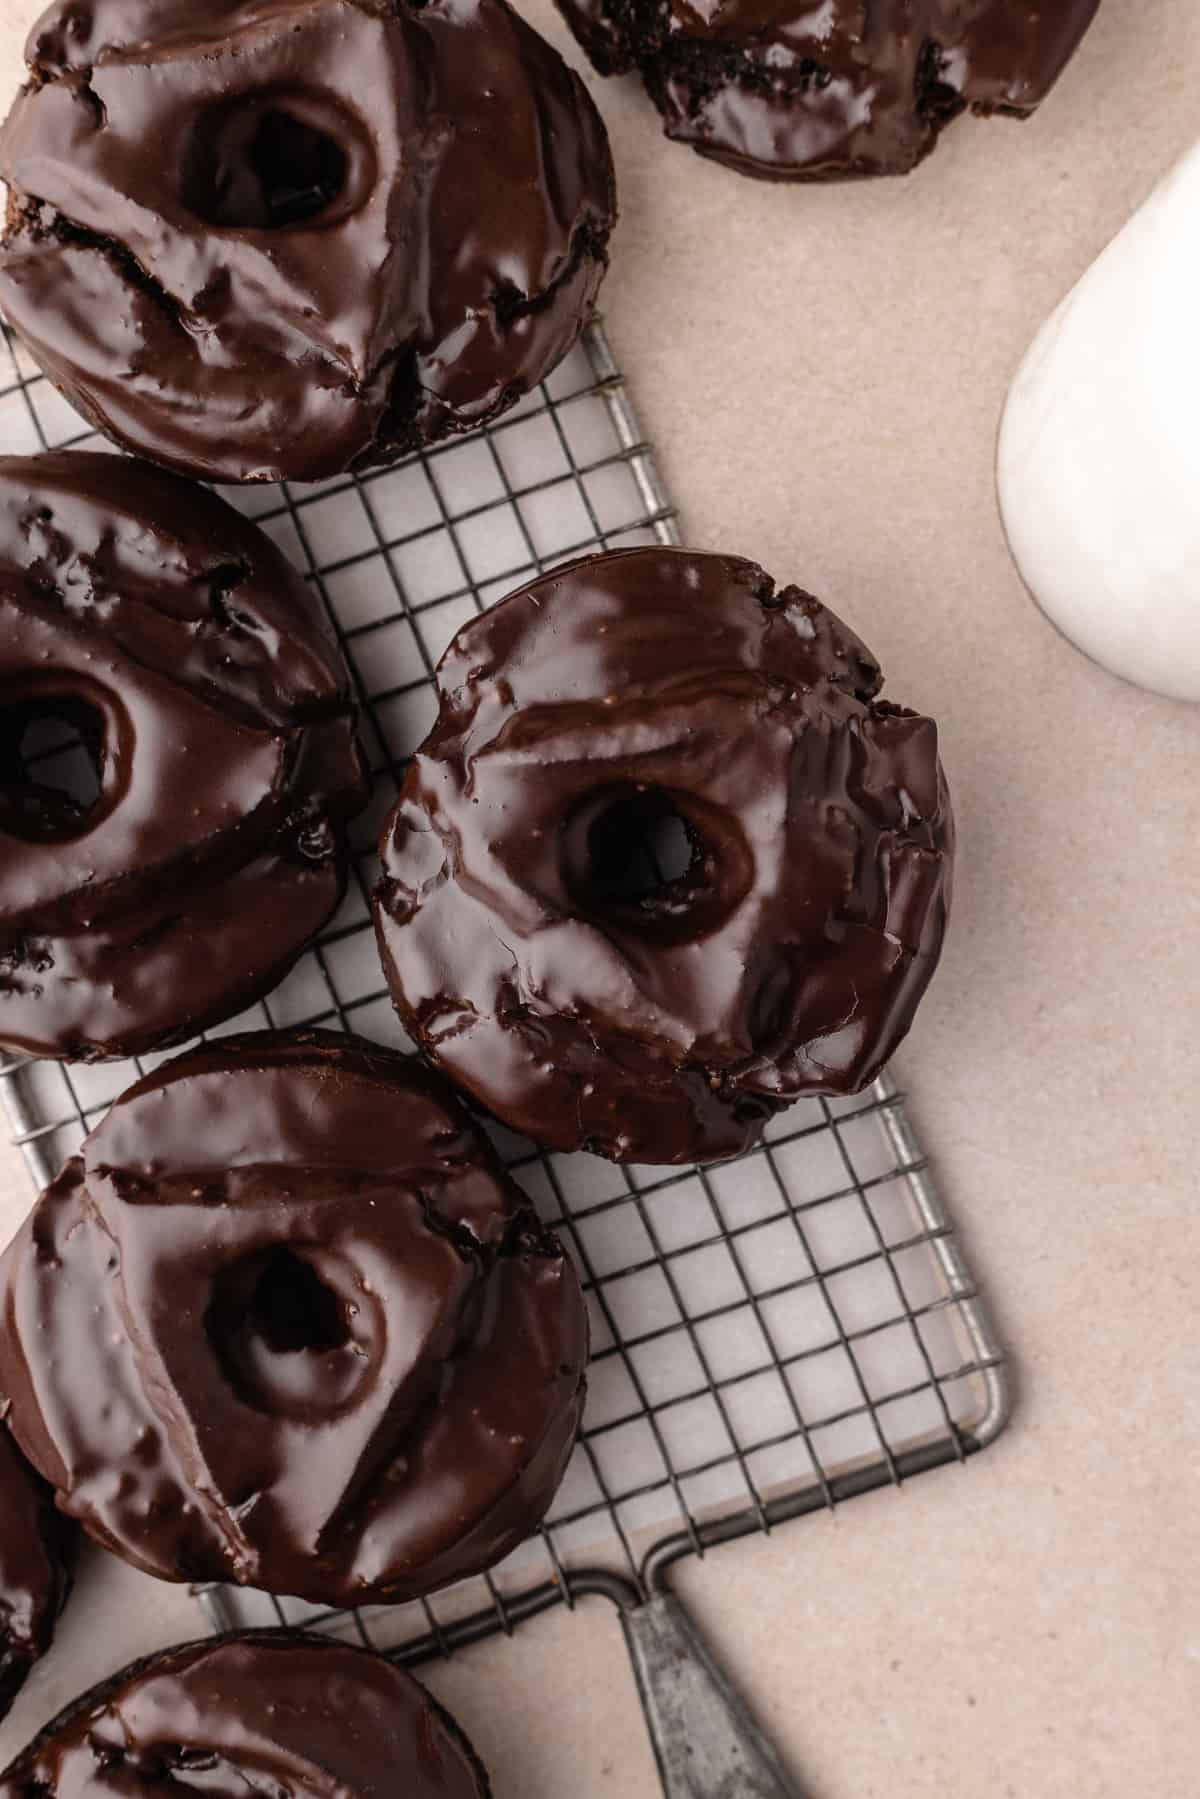 Chocolate old fashioned donuts on wire rack.